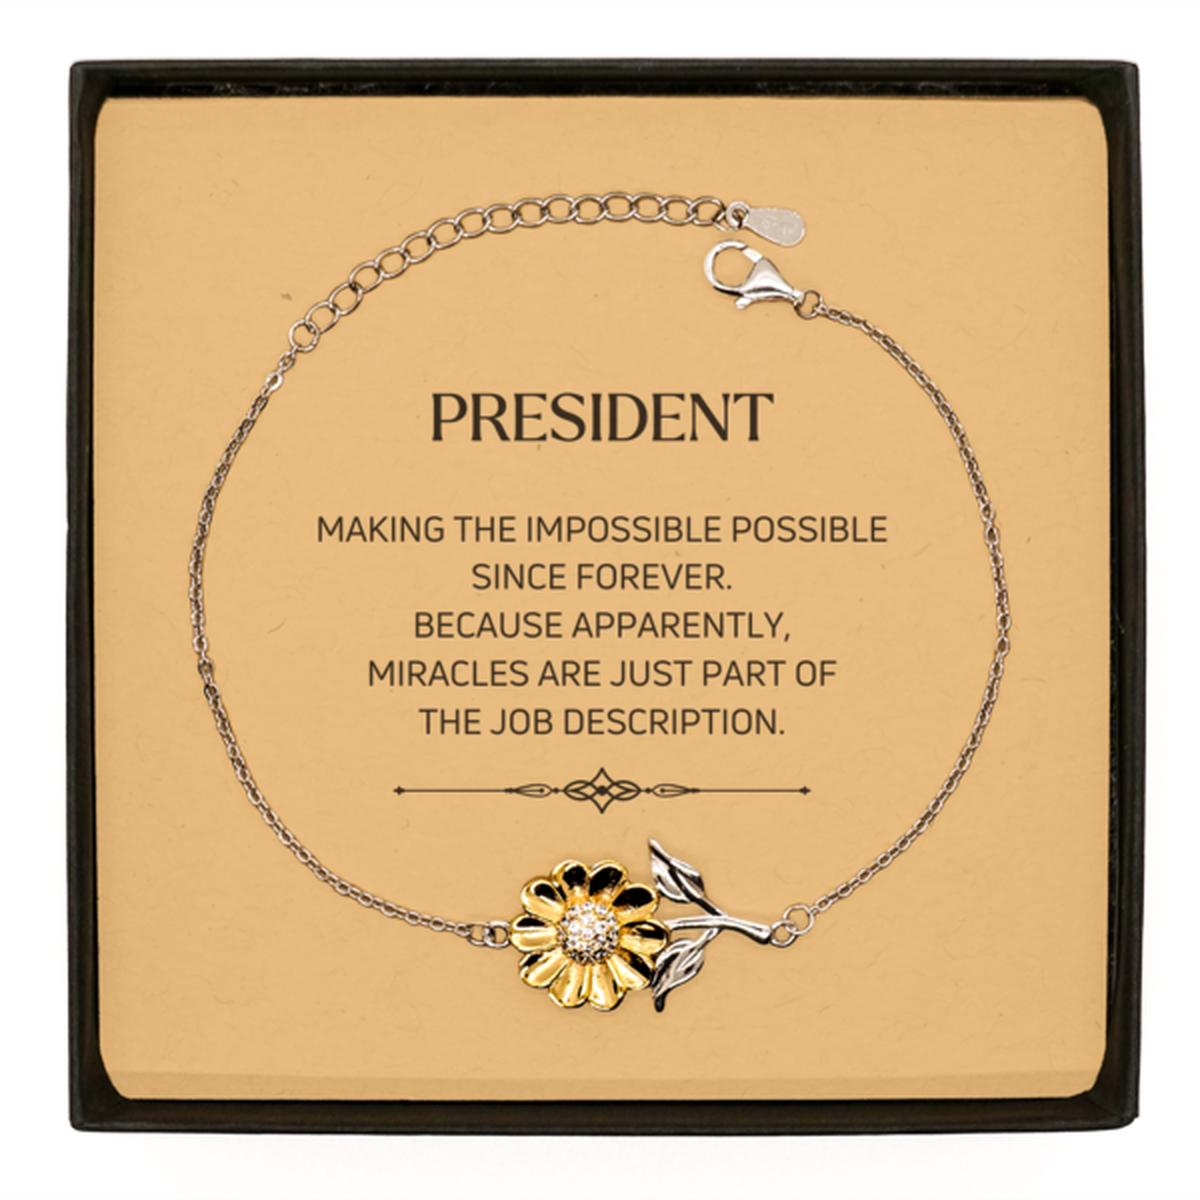 Funny President Gifts, Miracles are just part of the job description, Inspirational Birthday Sunflower Bracelet For President, Men, Women, Coworkers, Friends, Boss